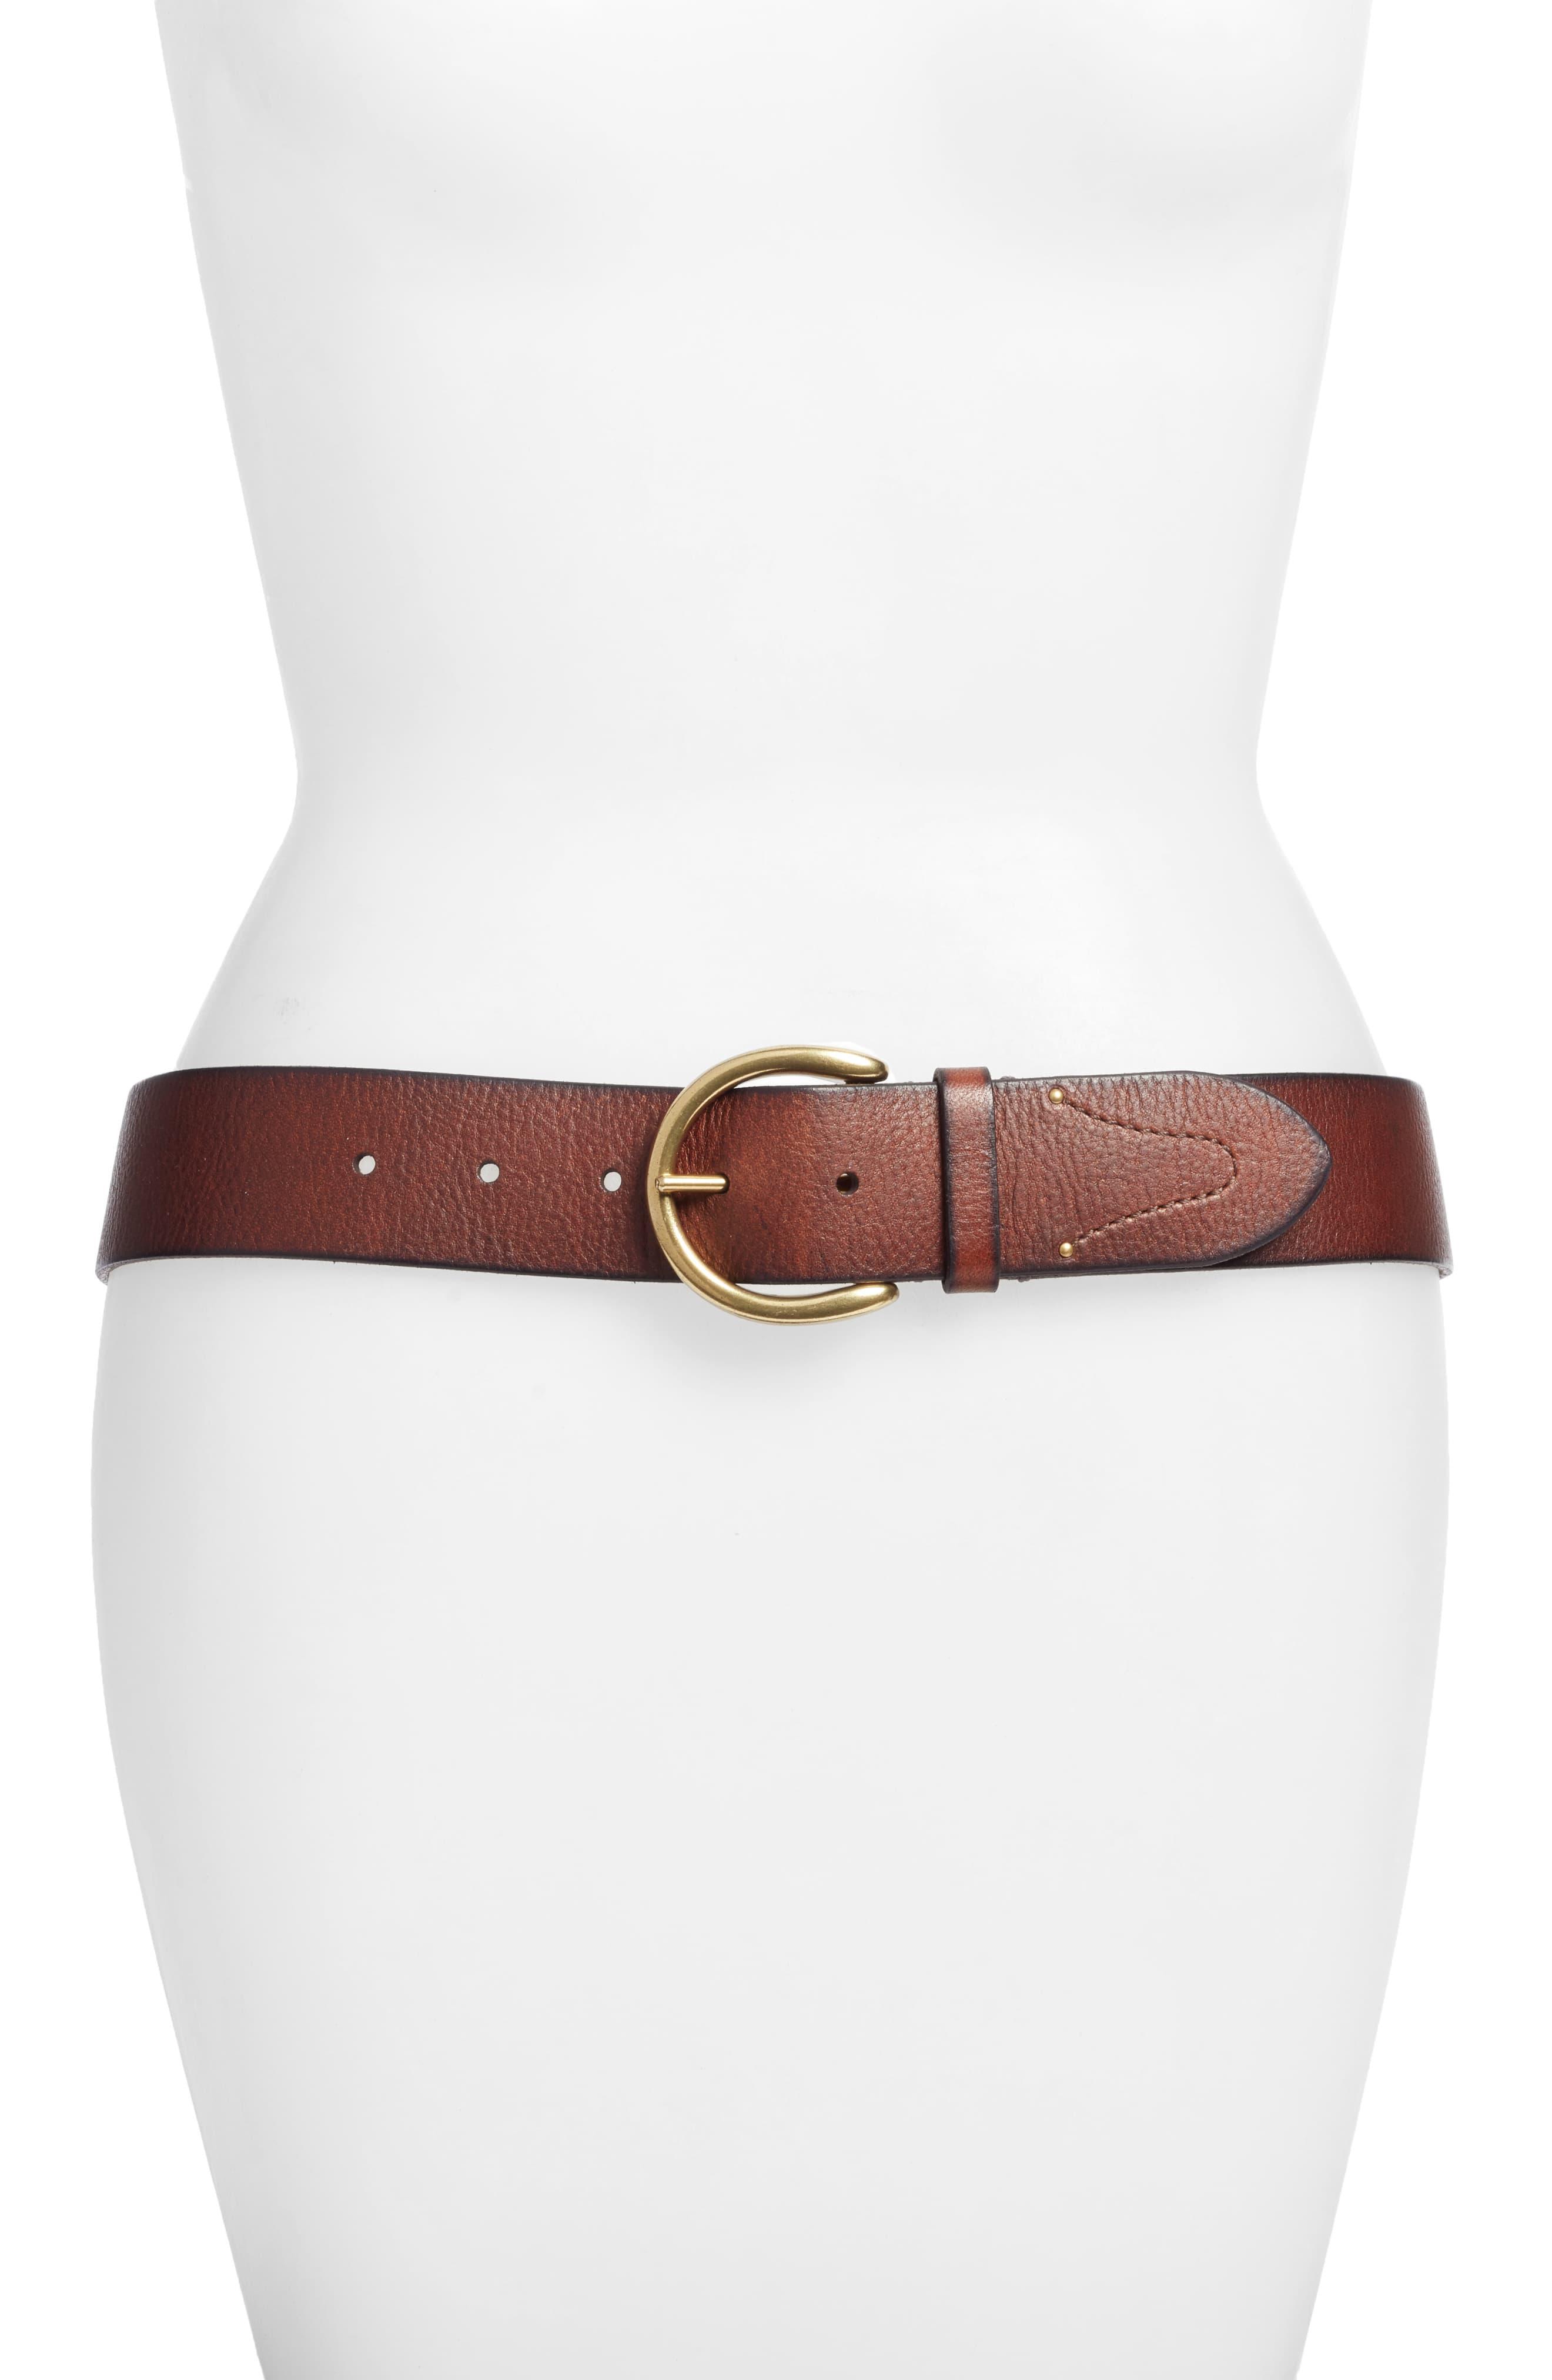 Frye Campus Leather Belt in Brown - Lyst